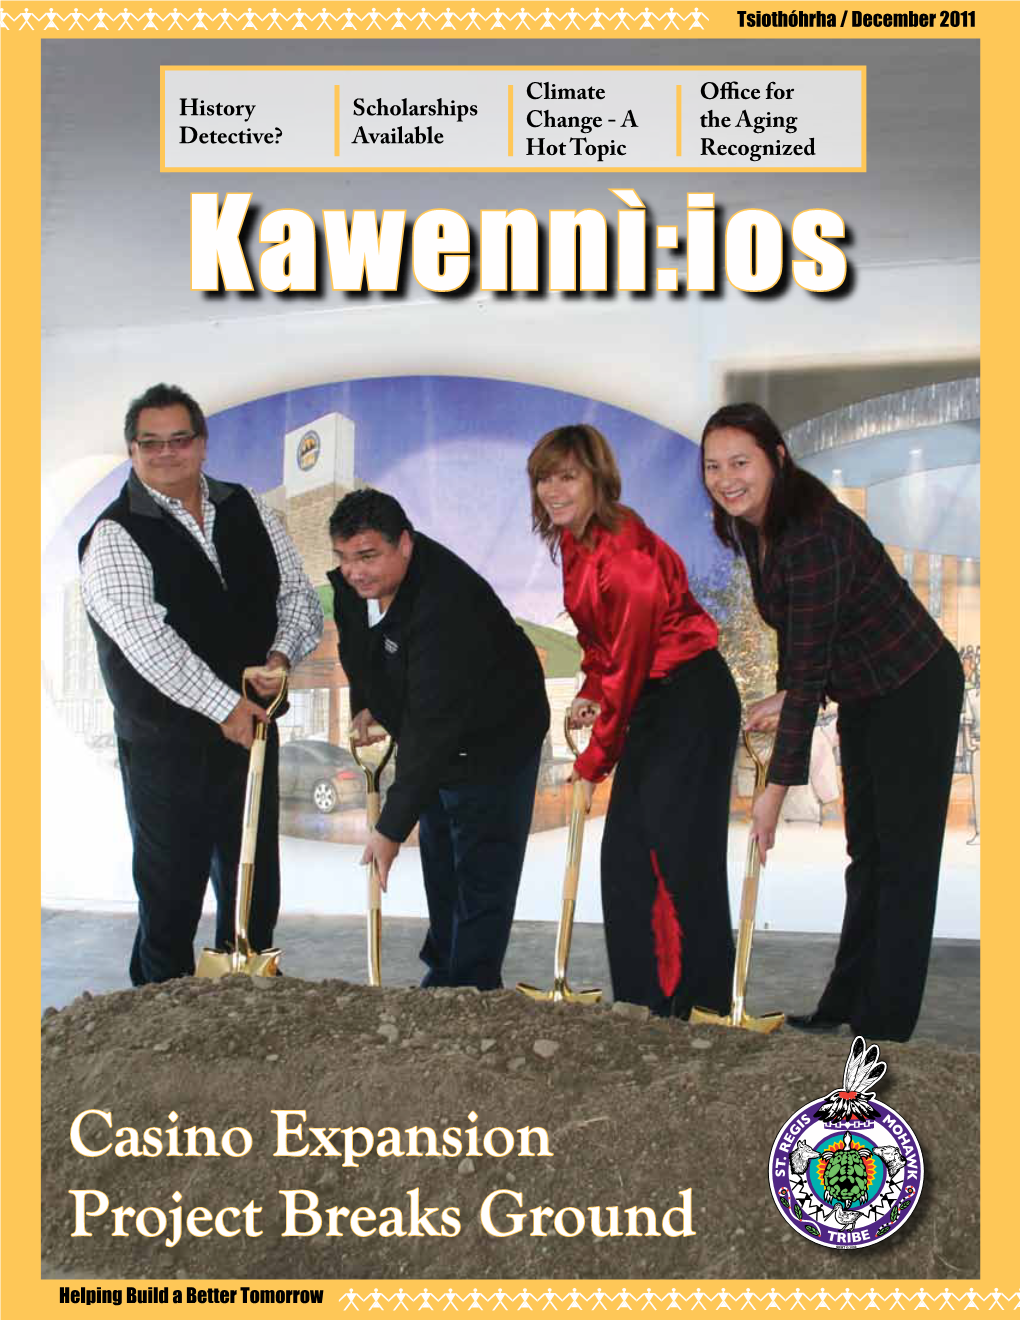 Casino Expansion Project Breaks Ground